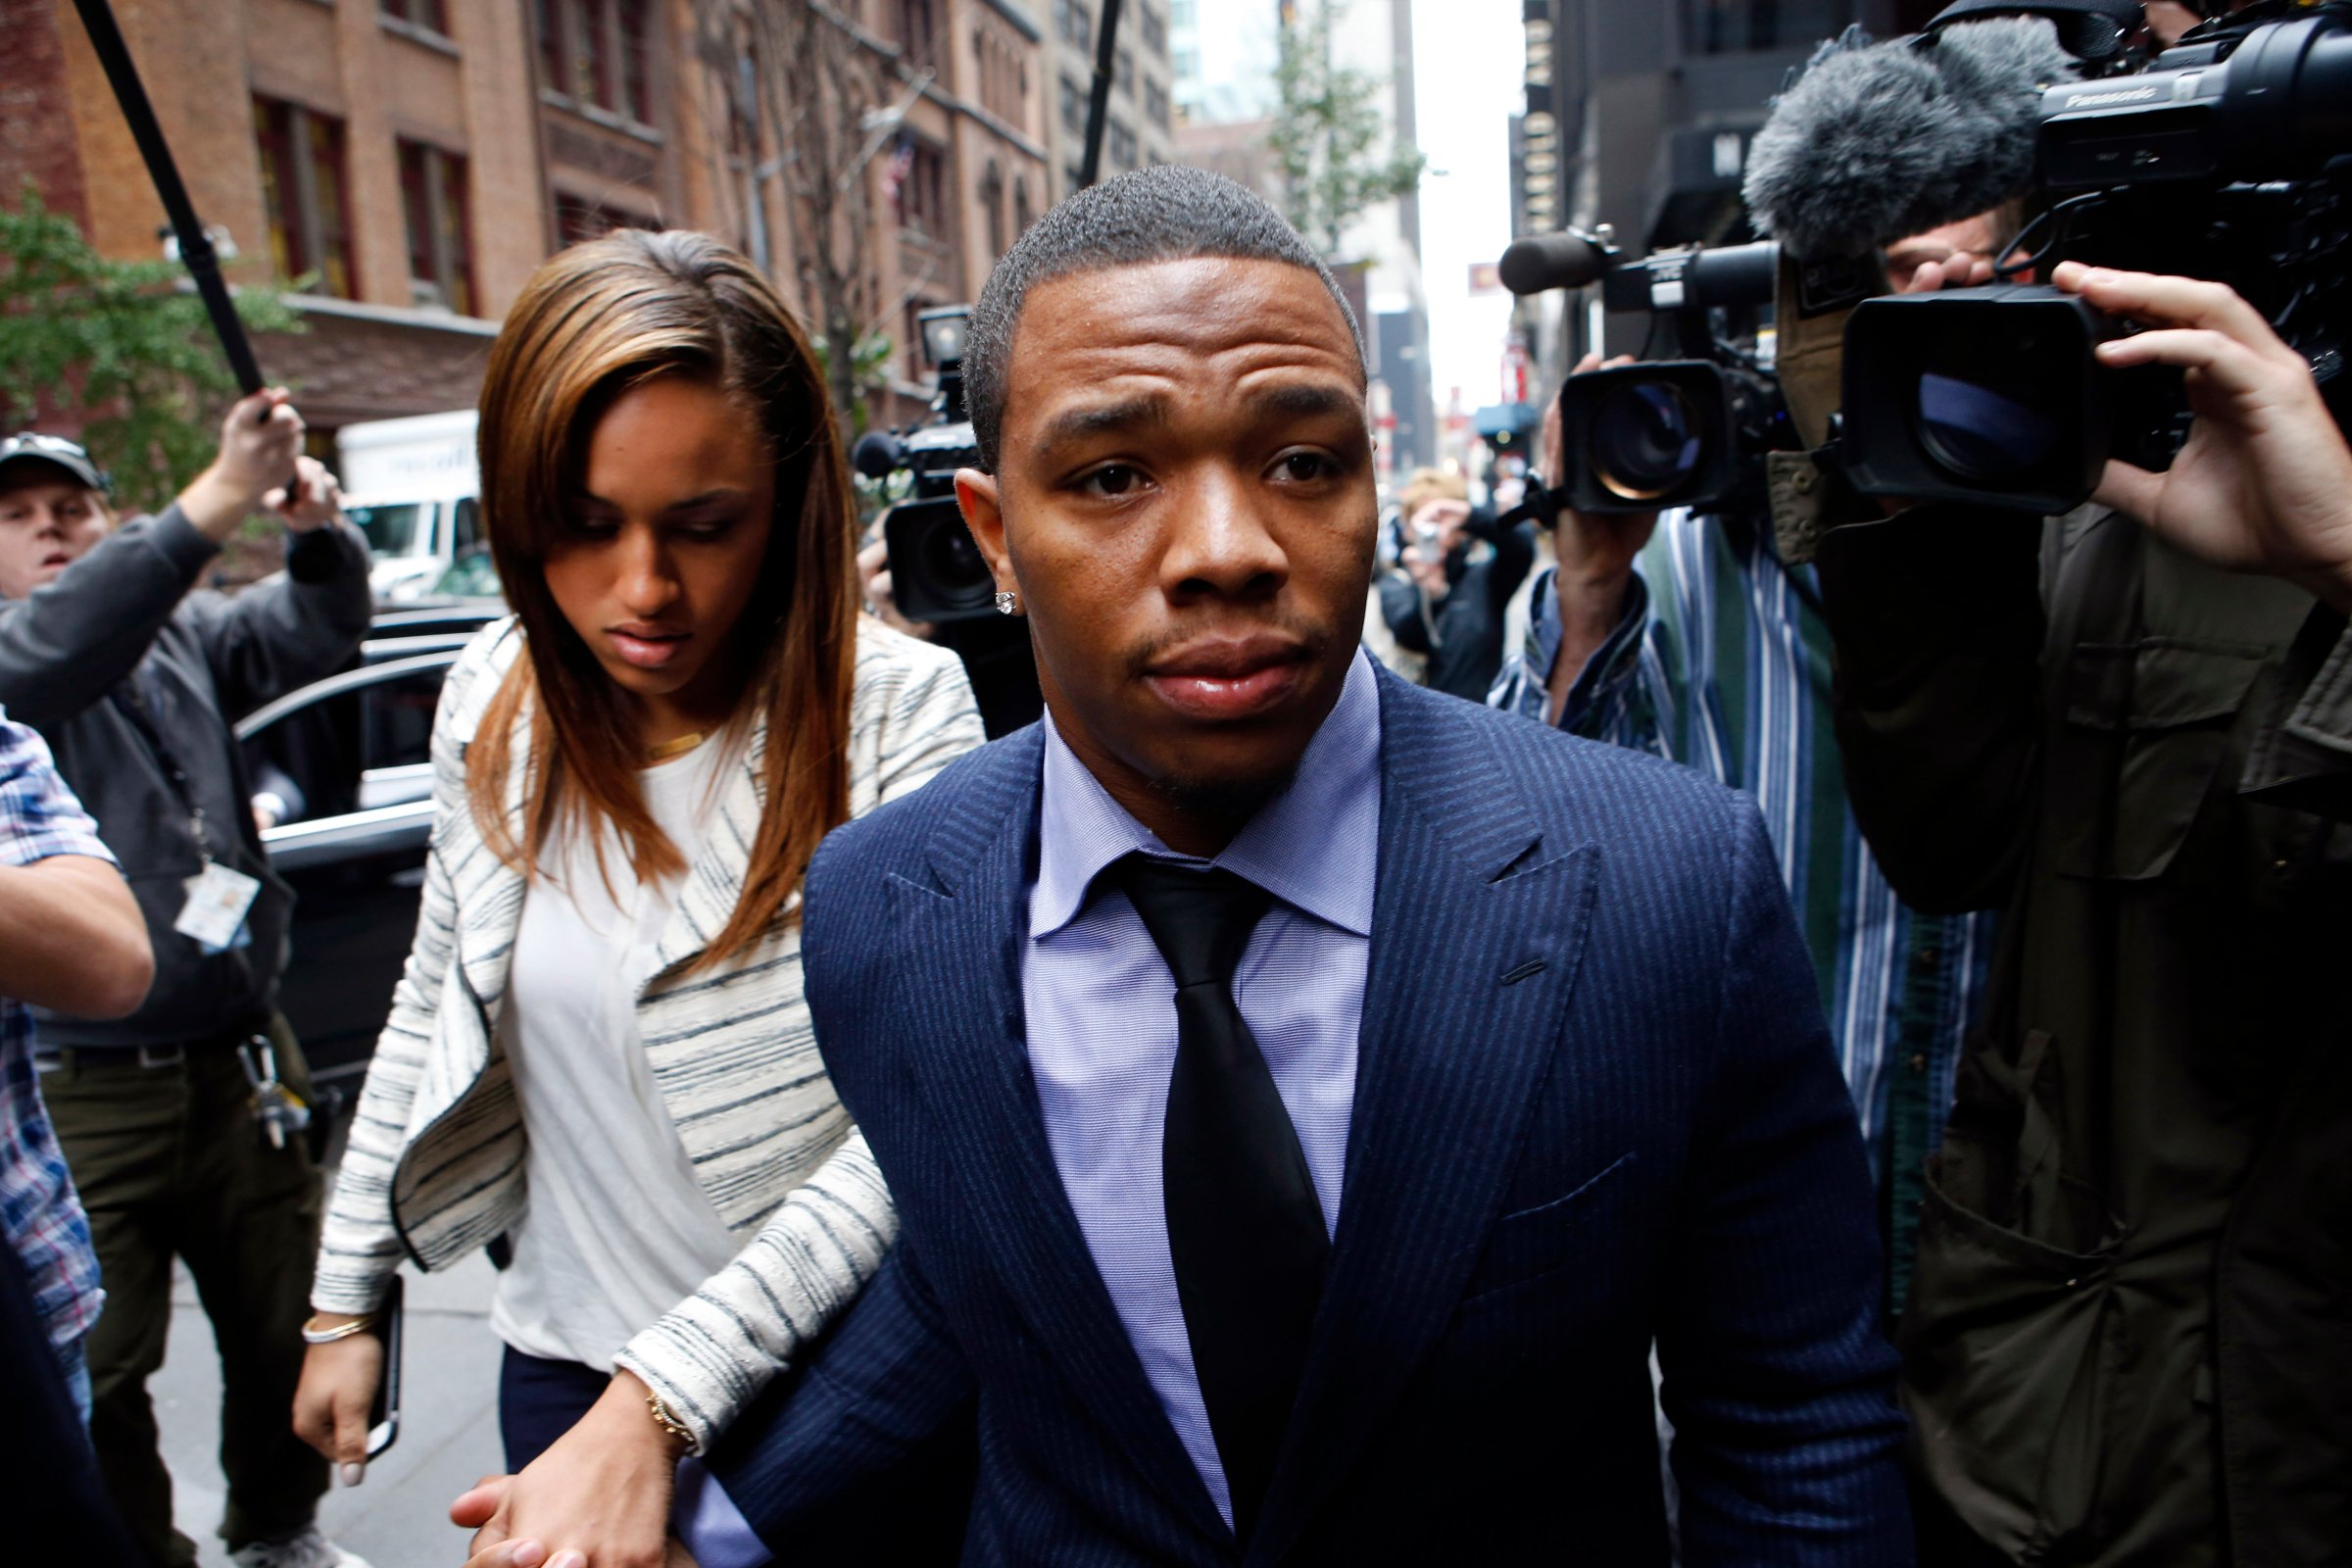 Ray Rice arrives with his wife Janay Palmer for an appeal hearing of his indefinite suspension from the NFL on Nov. 5, 2014, in New York.